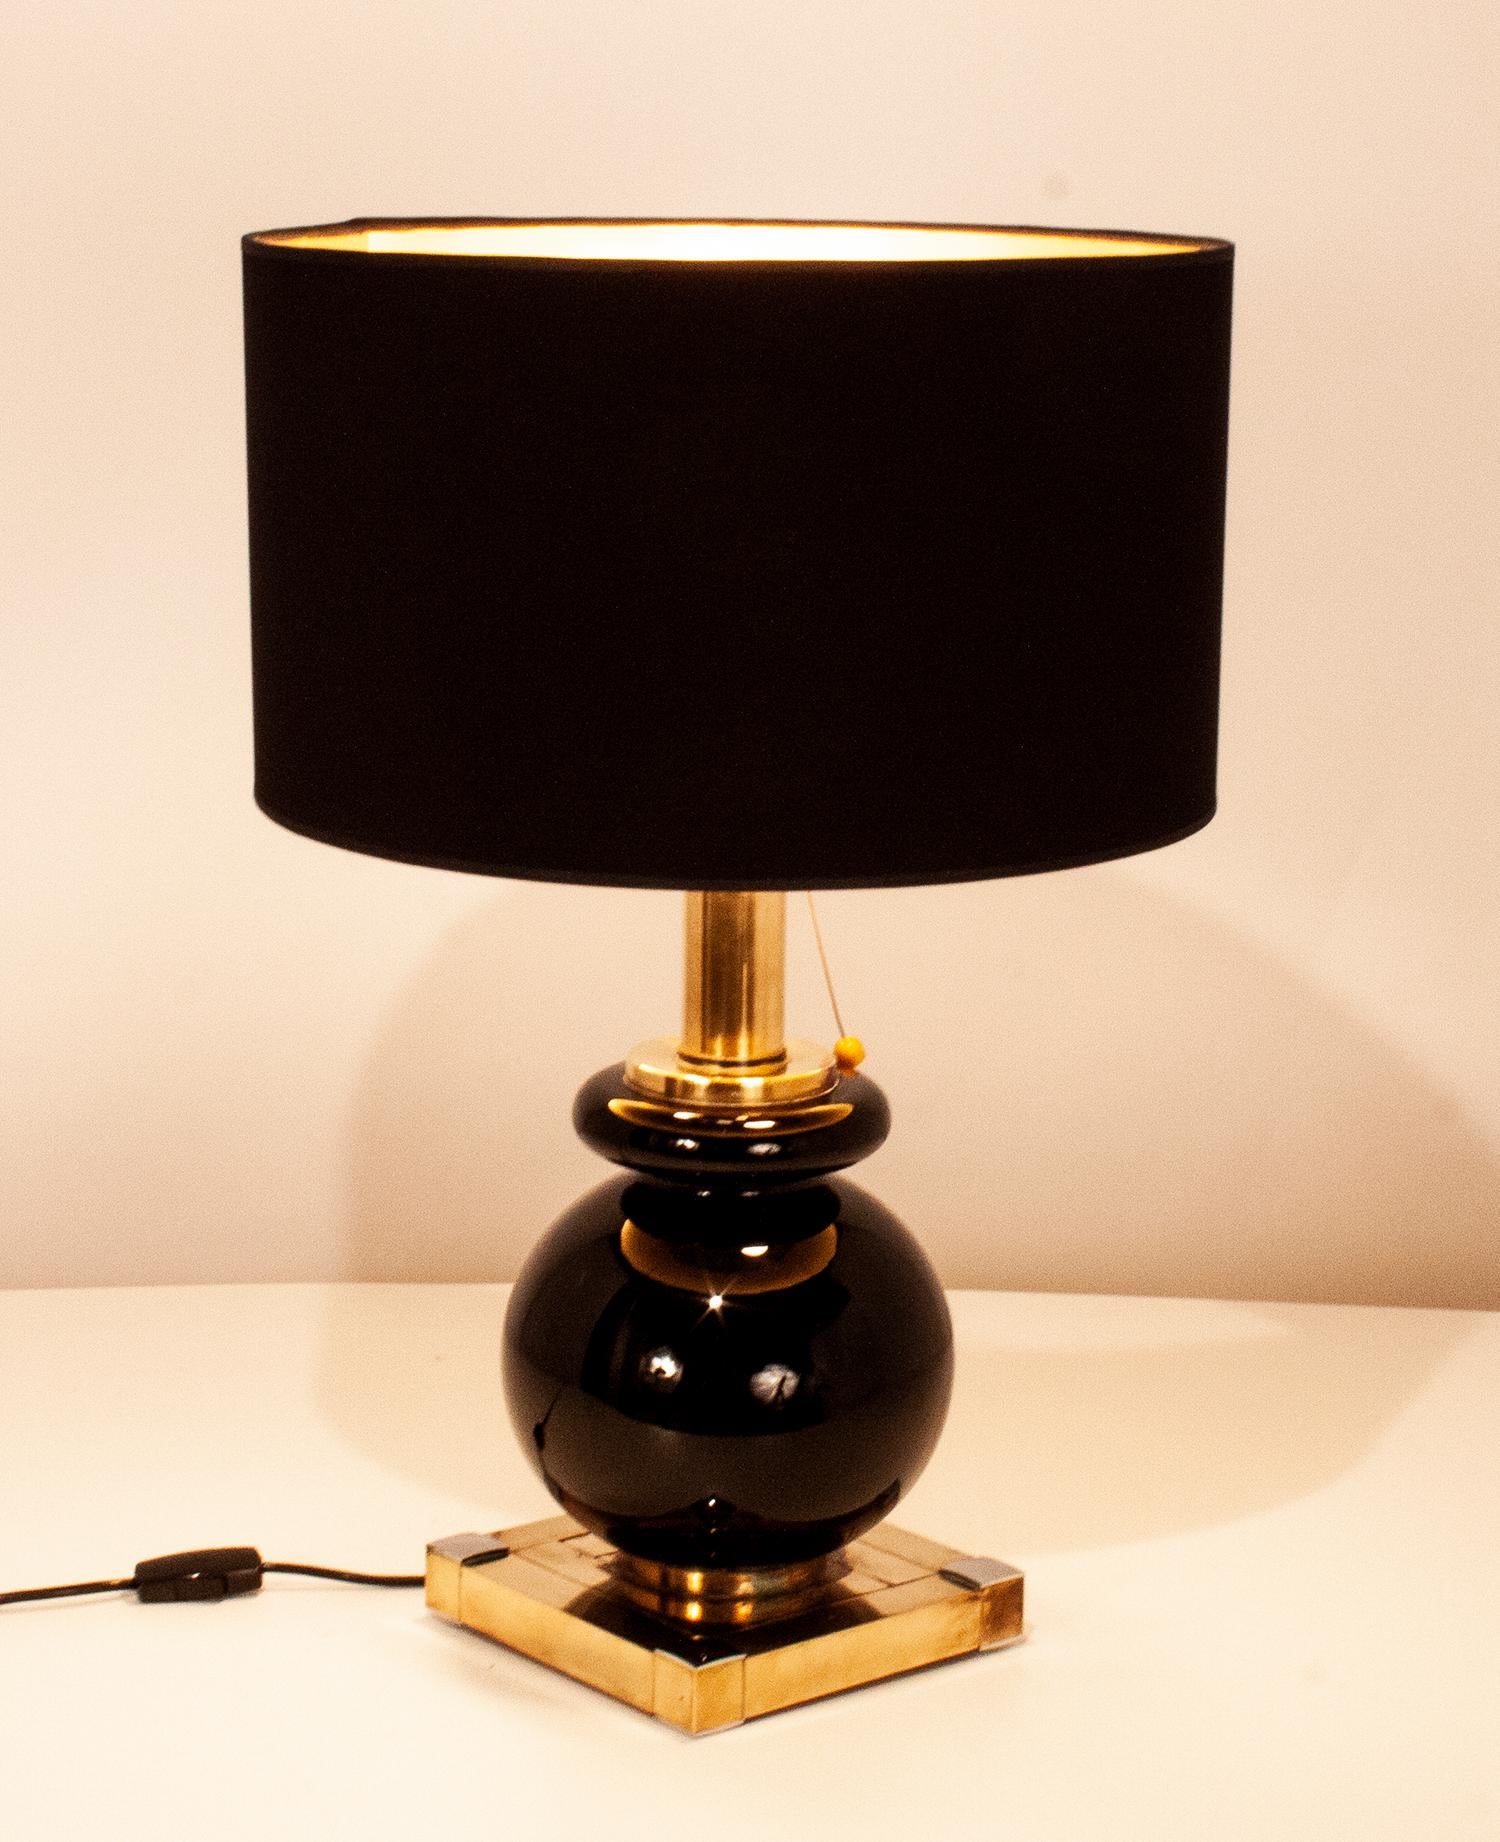 Midcentury Table Lamp Designed by Willy Rizzo, 1970s for Lumica, Spain, Brass For Sale 3